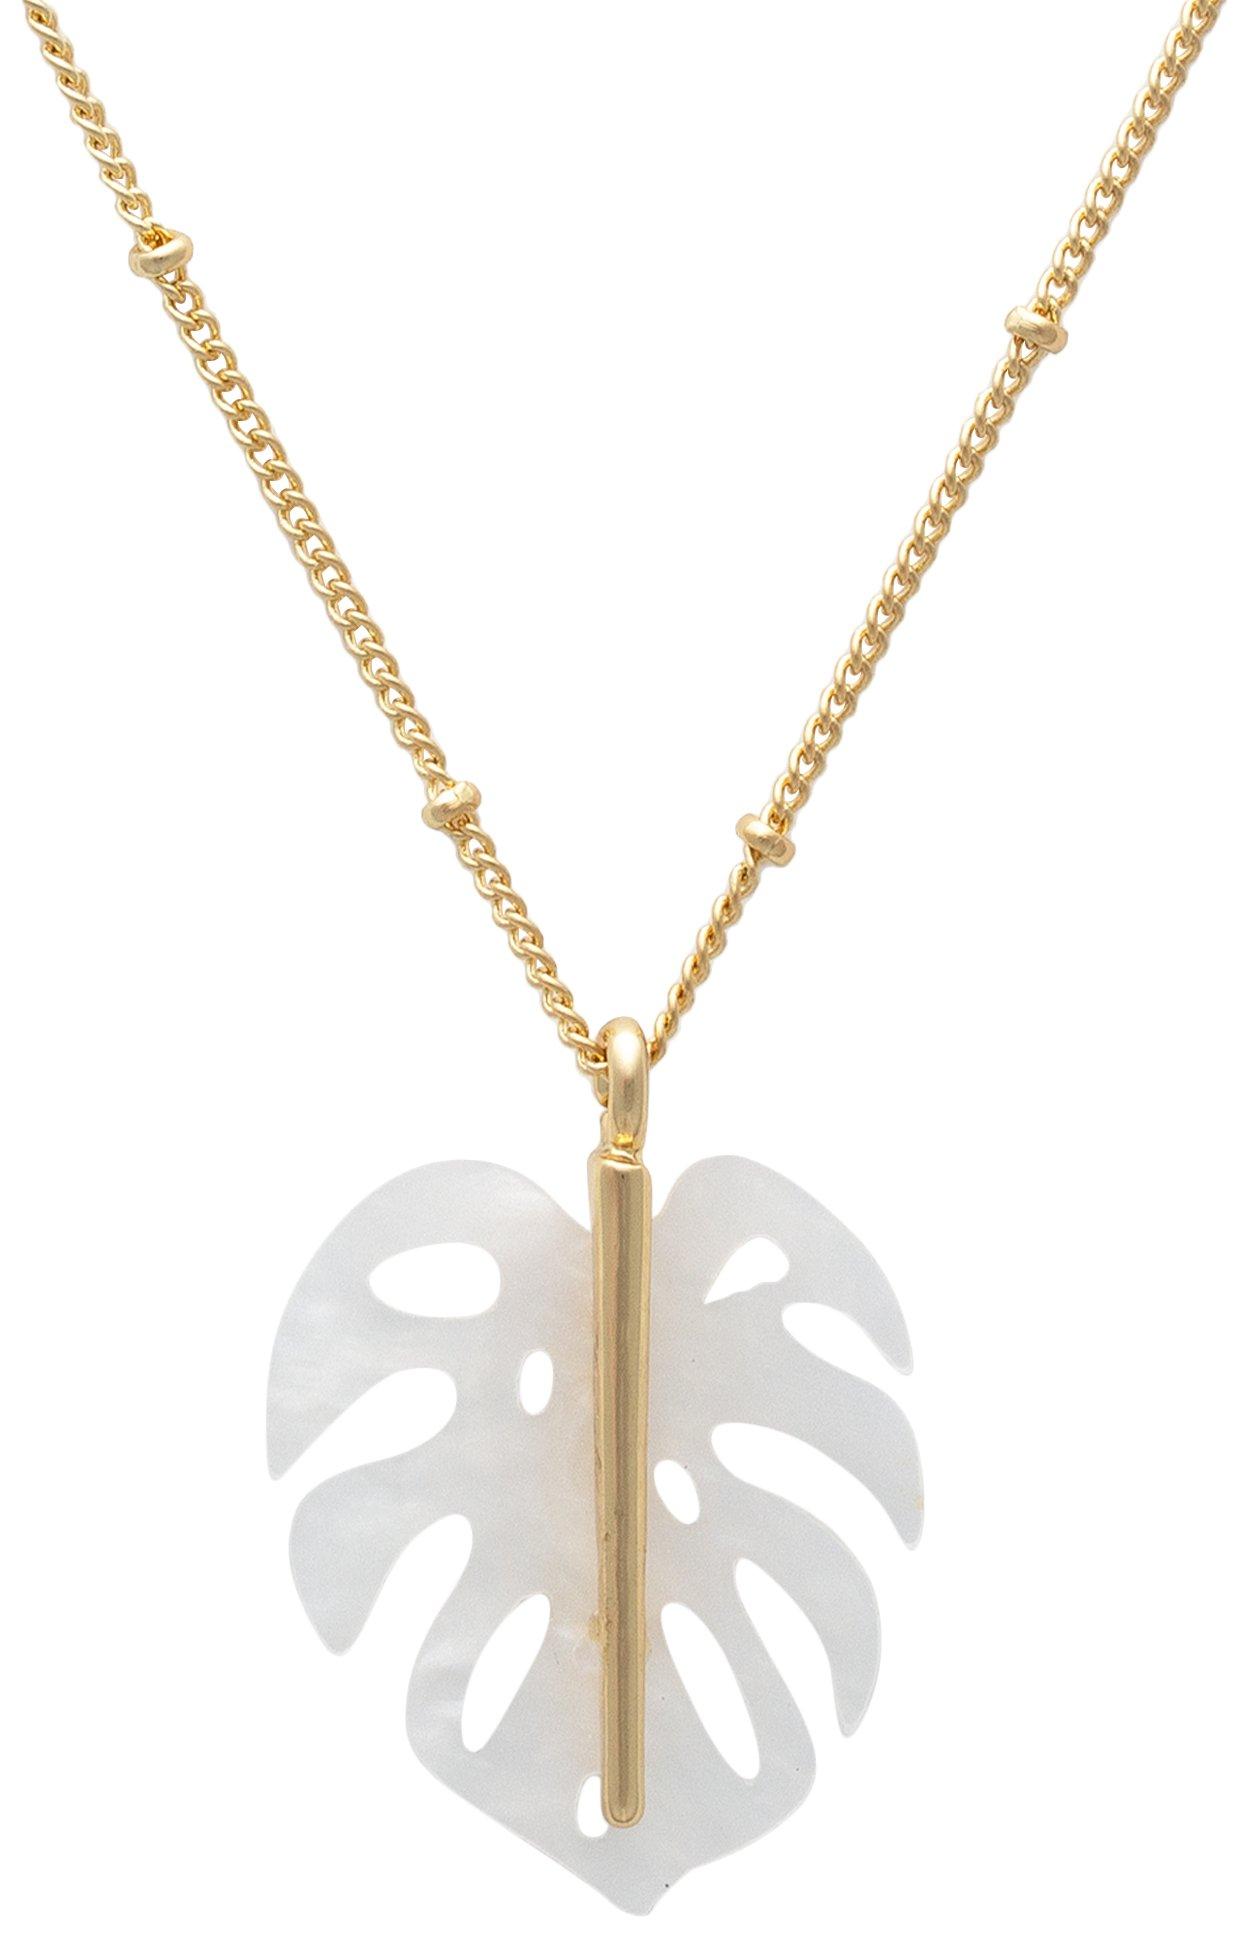 20 In. Monstera Leaf Gold Tone Necklace